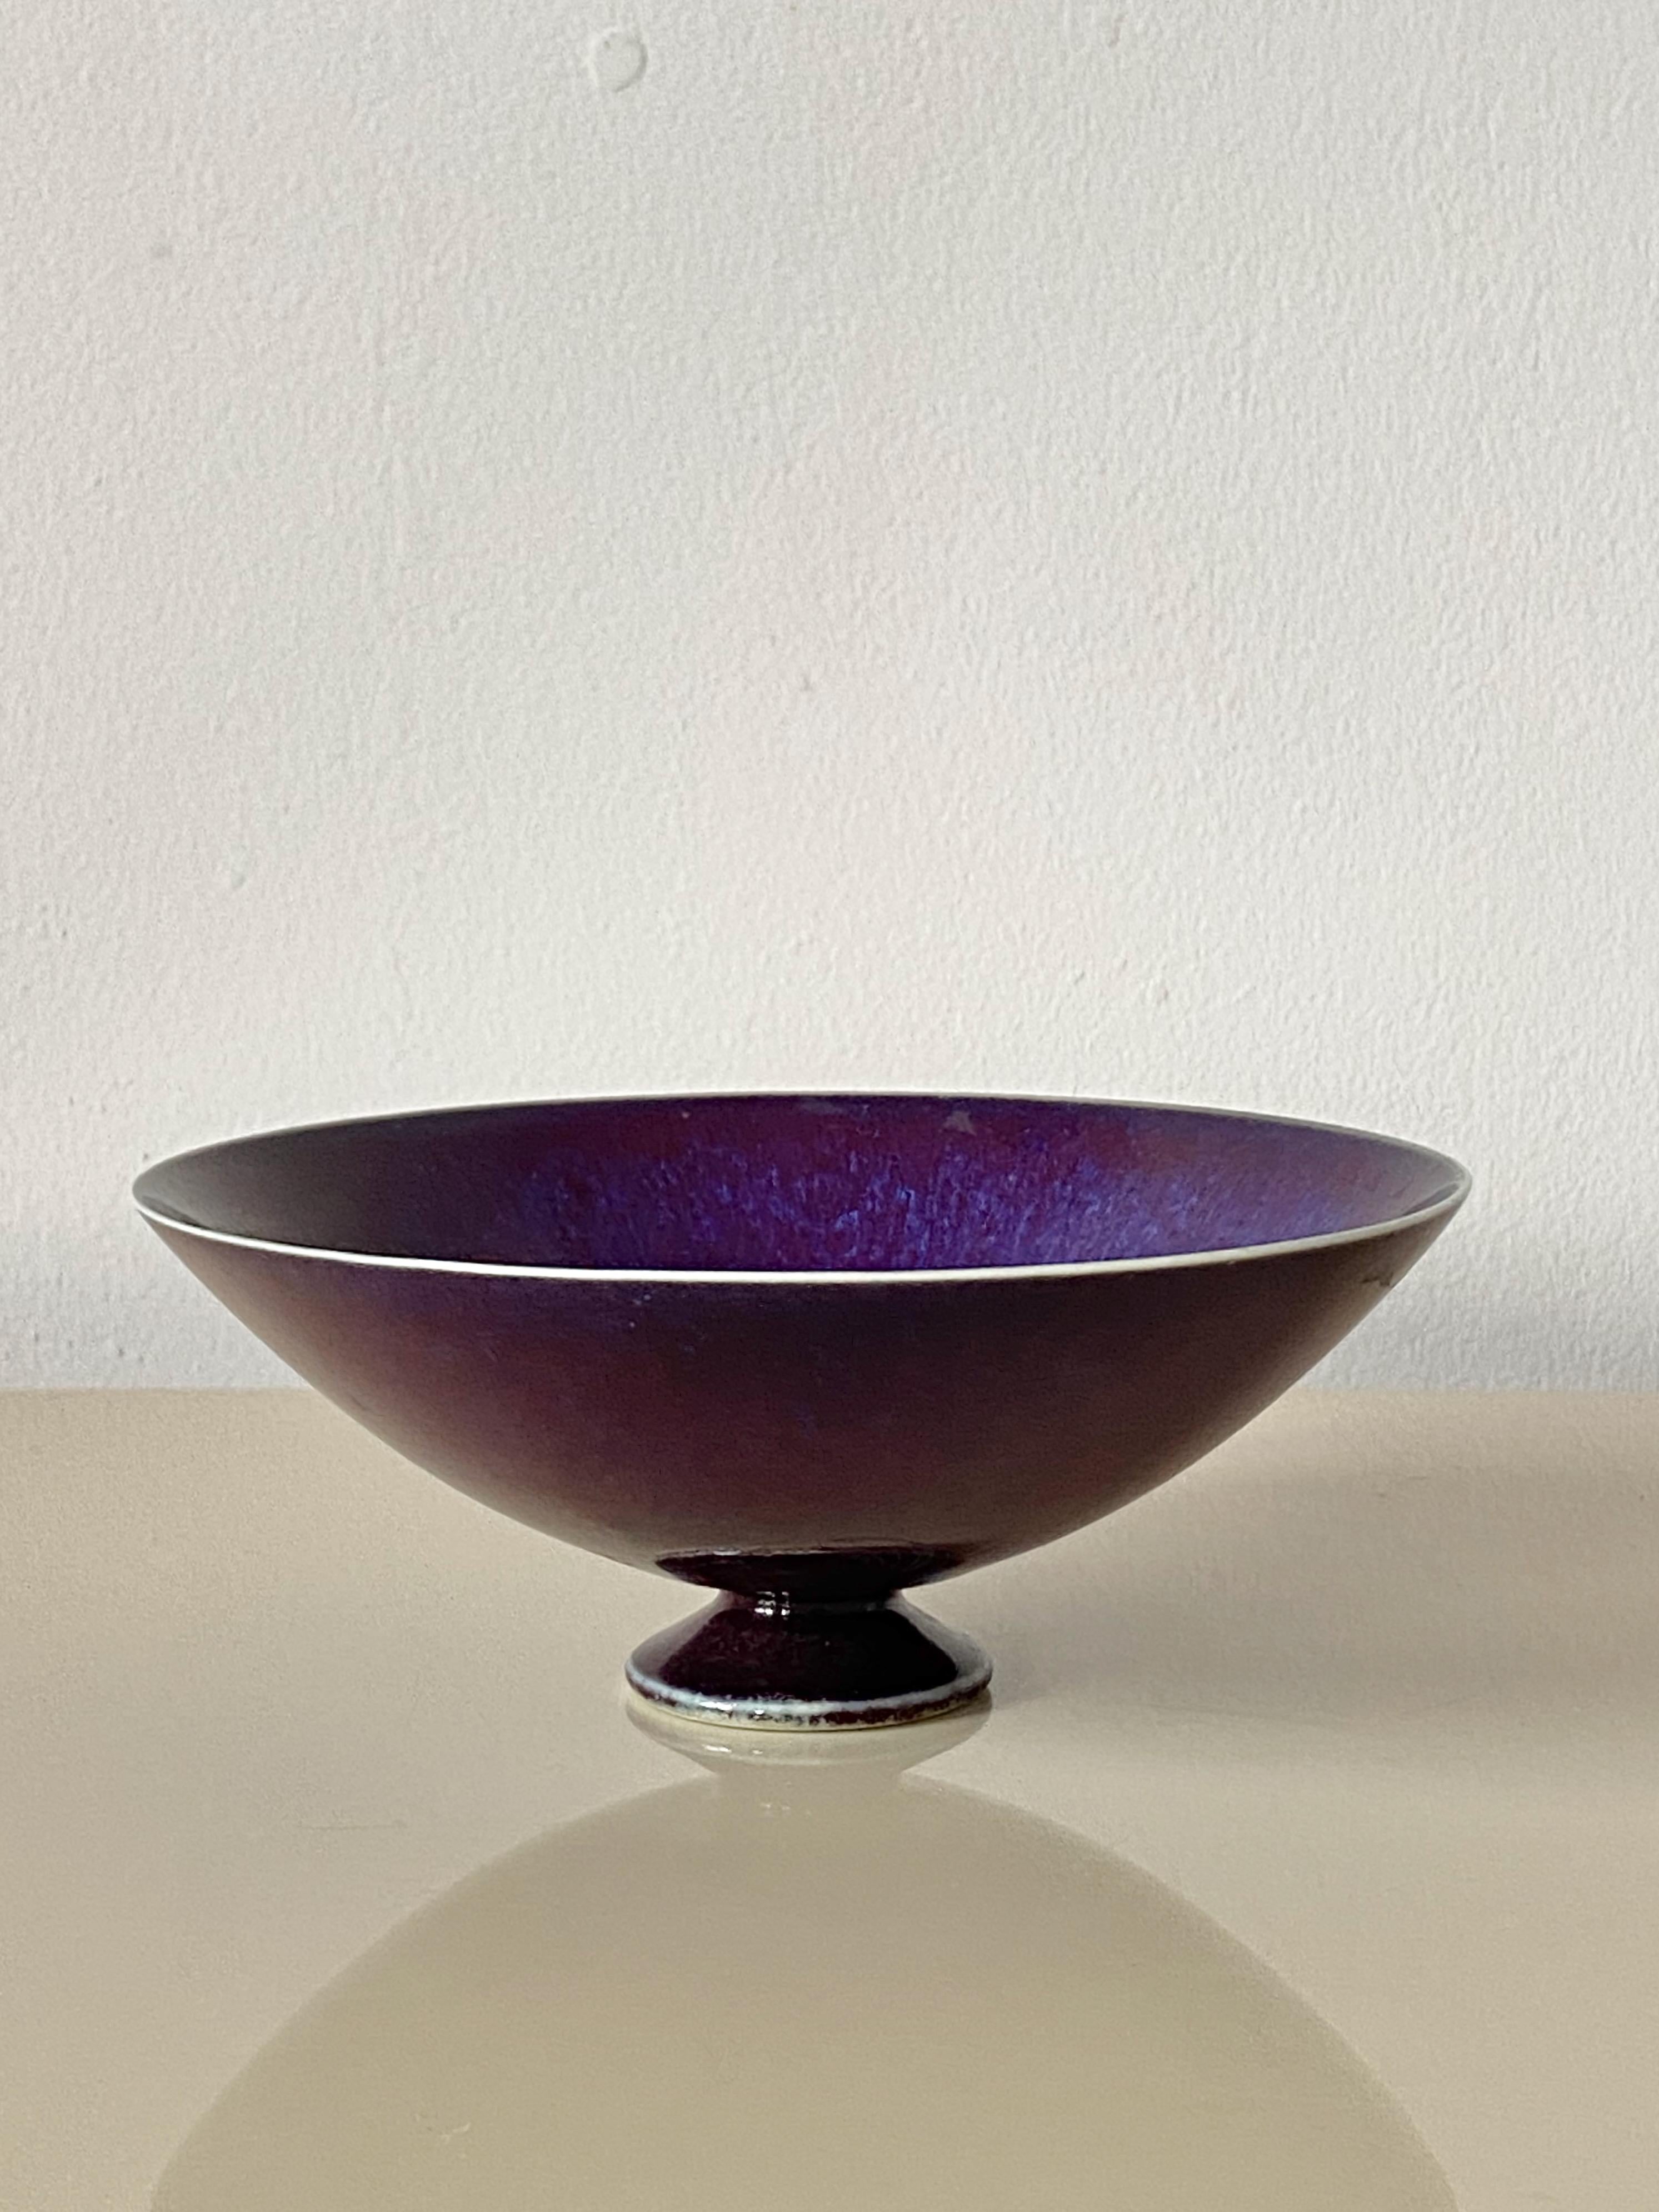 Late 20th Century Small Blue and Red Stoneware Bowl by Sven Wejsfelt, Gustavsberg, Sweden, 1986 For Sale